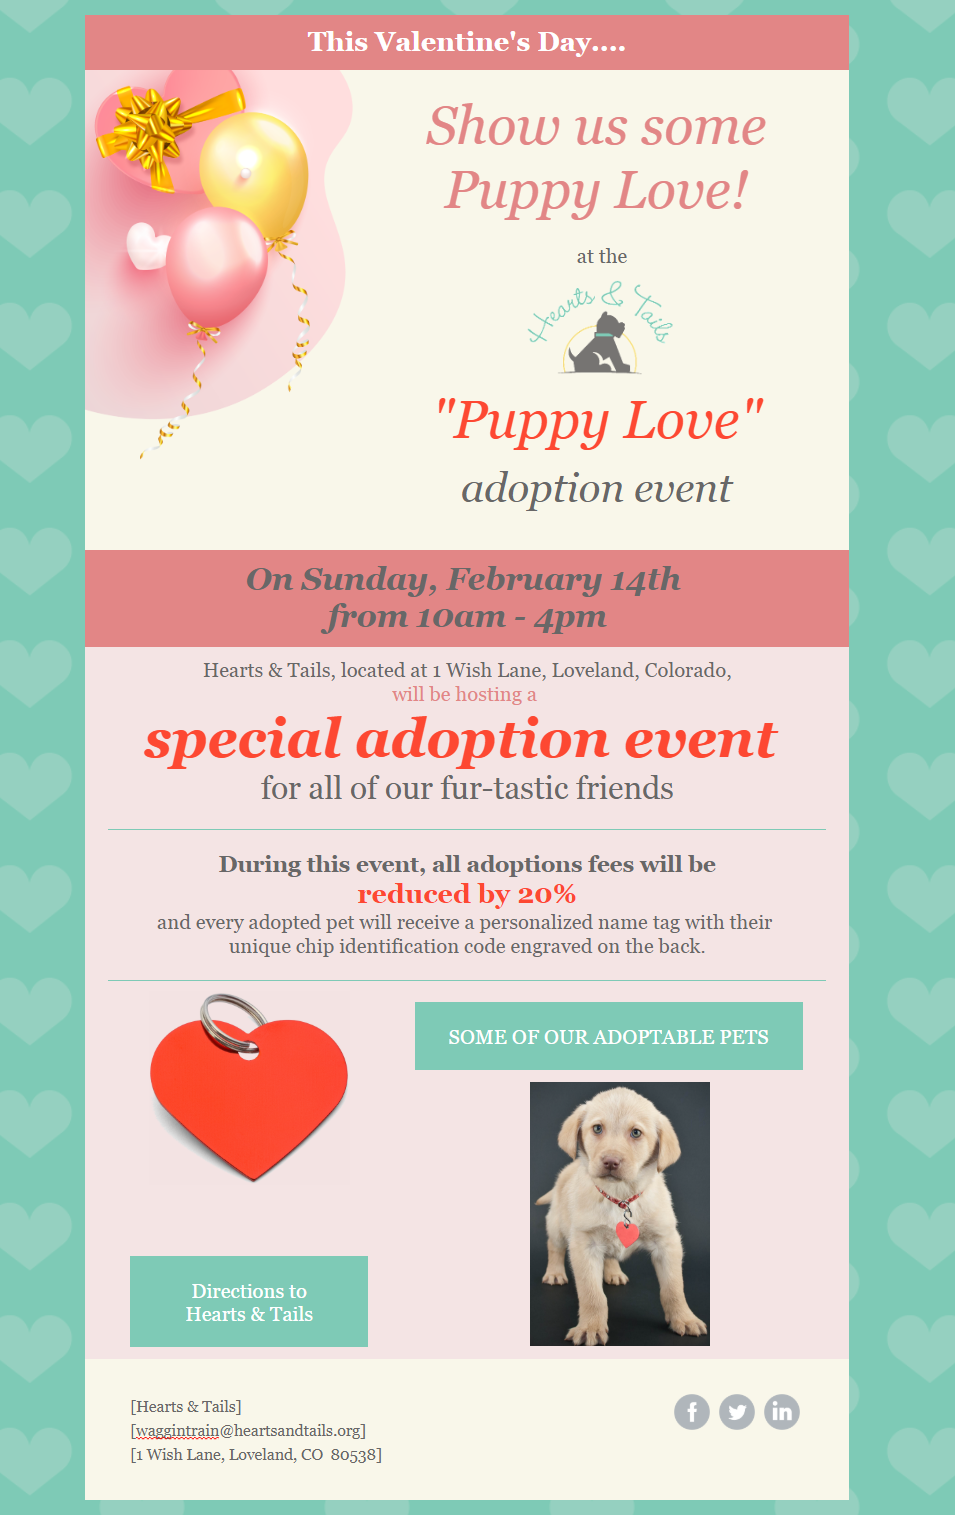 Constant Contact Valentine's Day Sale template turned into a nonprofit fundraising event invitation